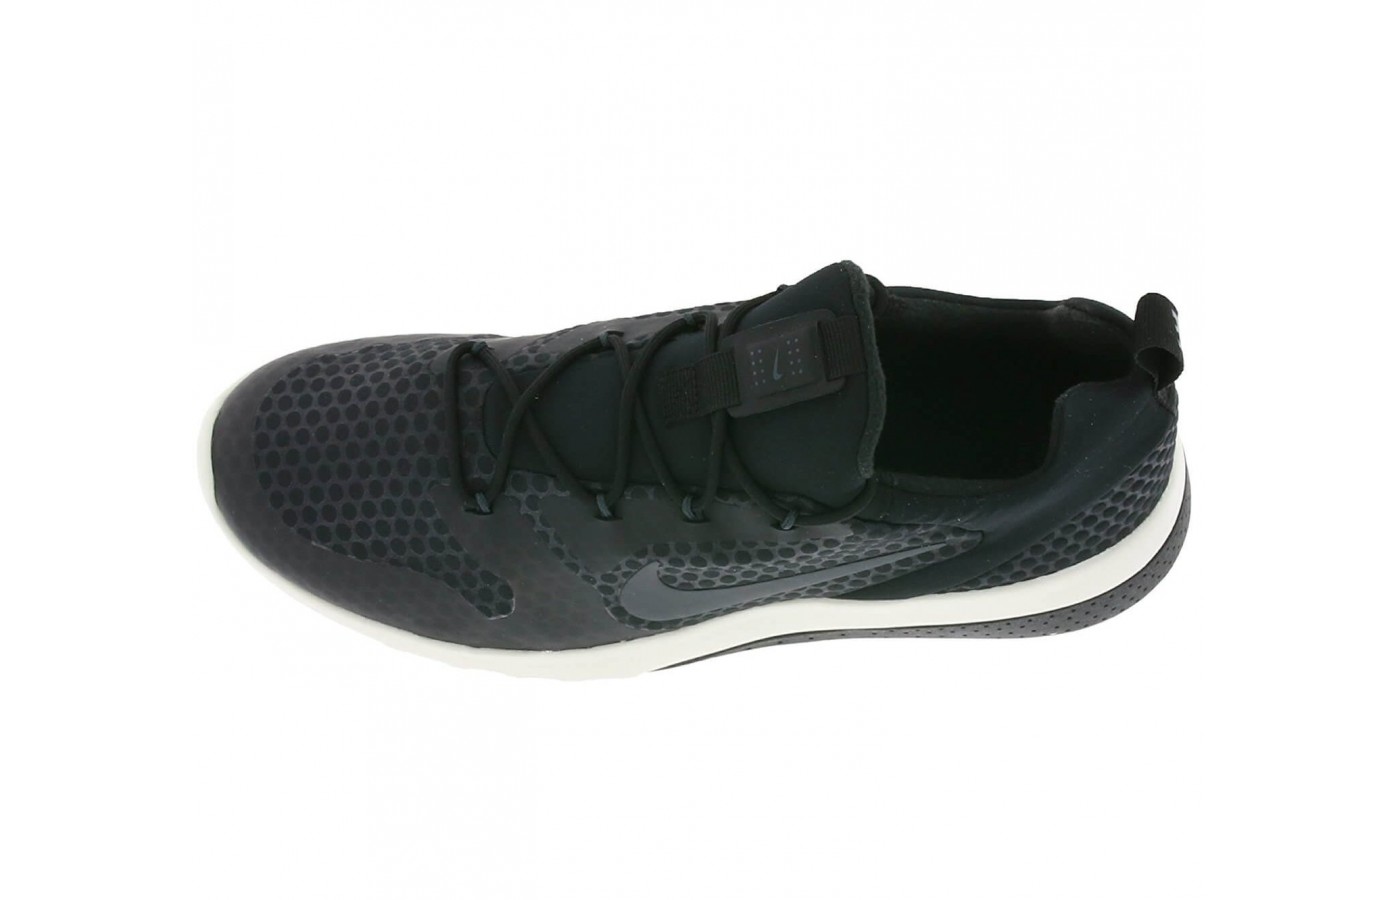 The upper portion of the Nike CK Racer is less breathable than their Flyknit material but much more protective.